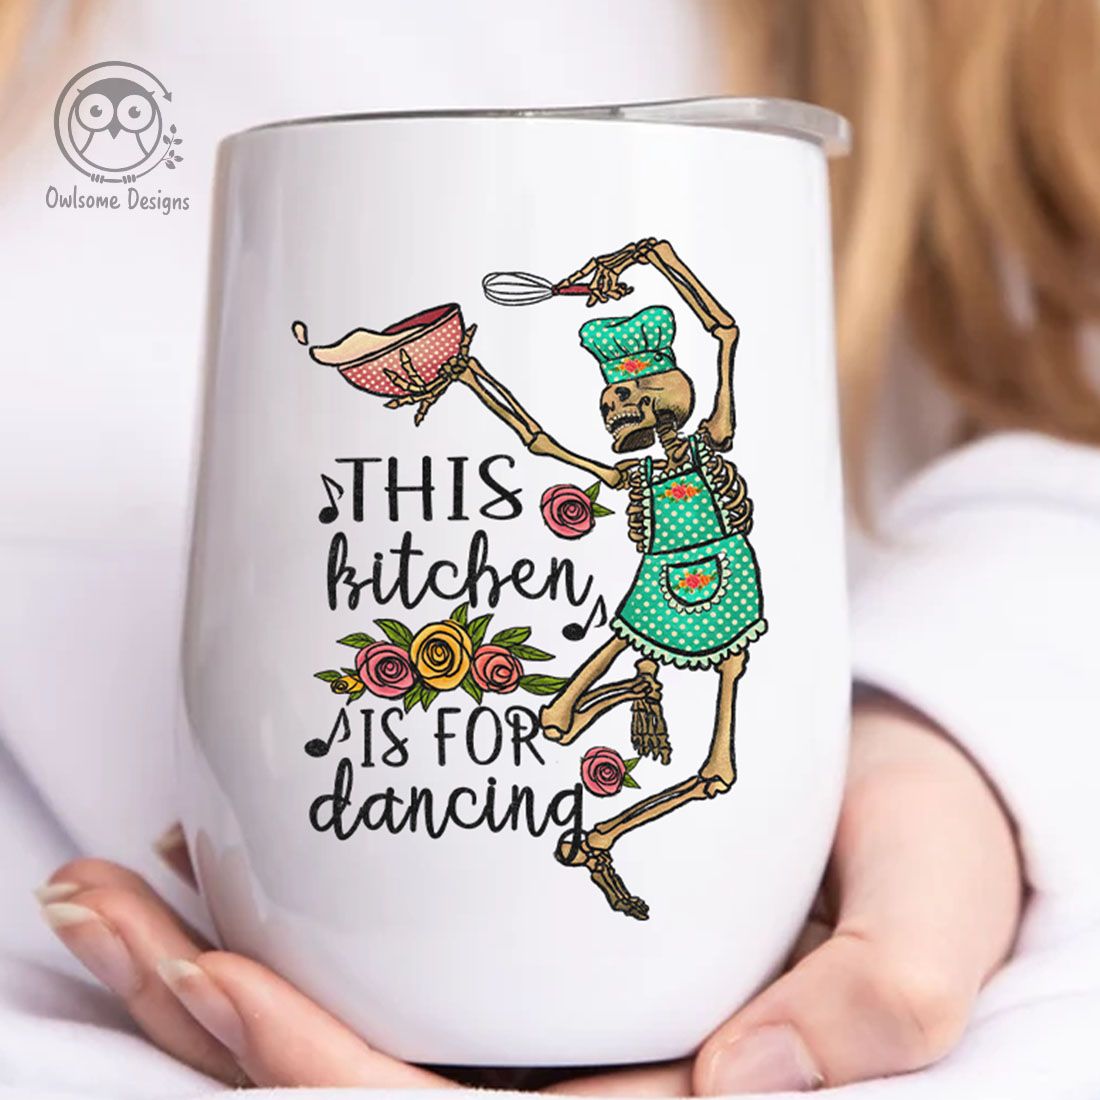 Image of a cup with an enchanting print of a dancing skeleton in the kitchen.